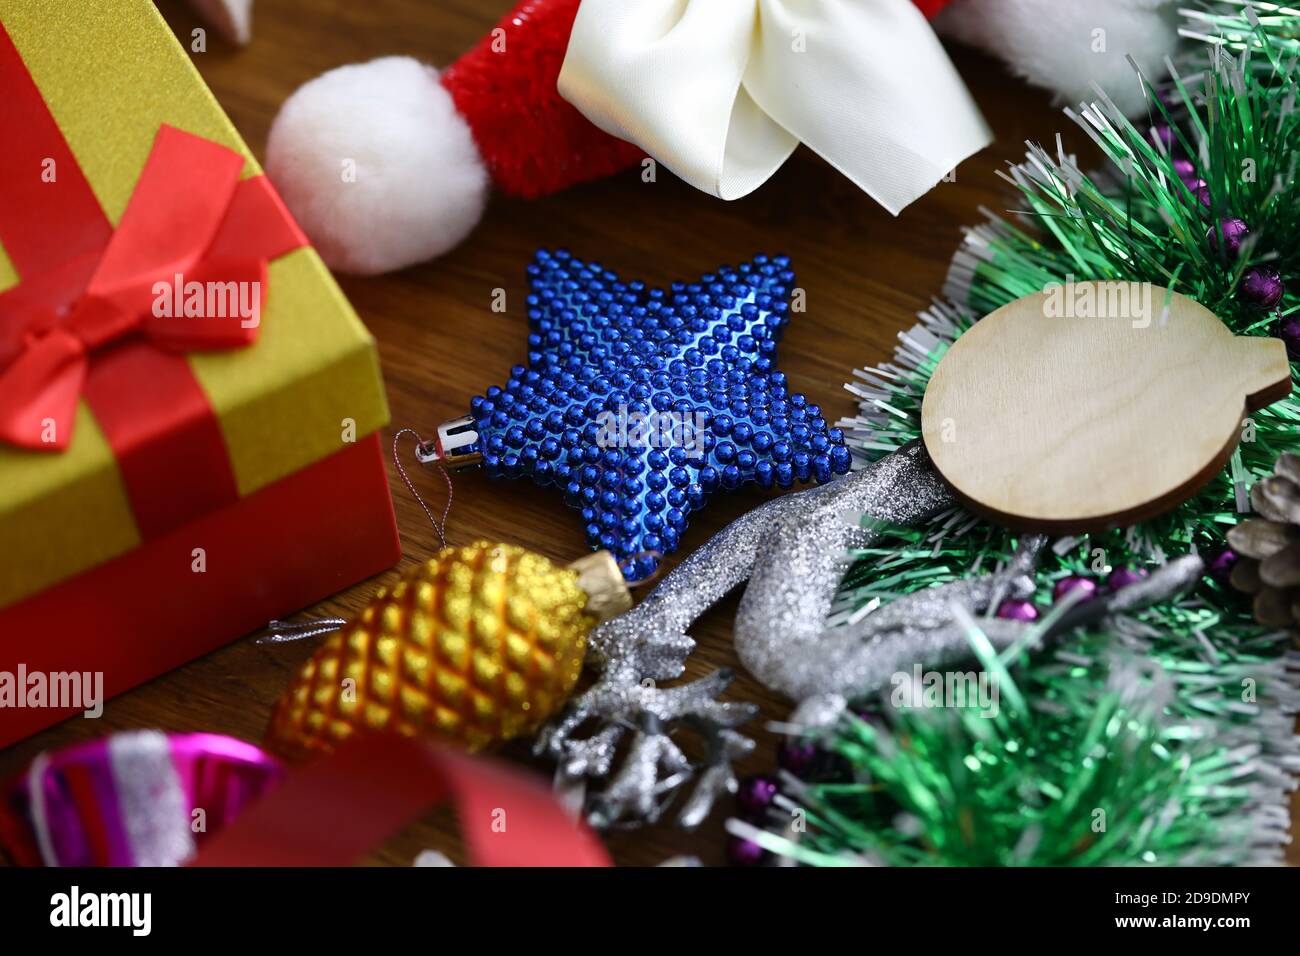 Christmas decorations and gift box lies on table. Stock Photo